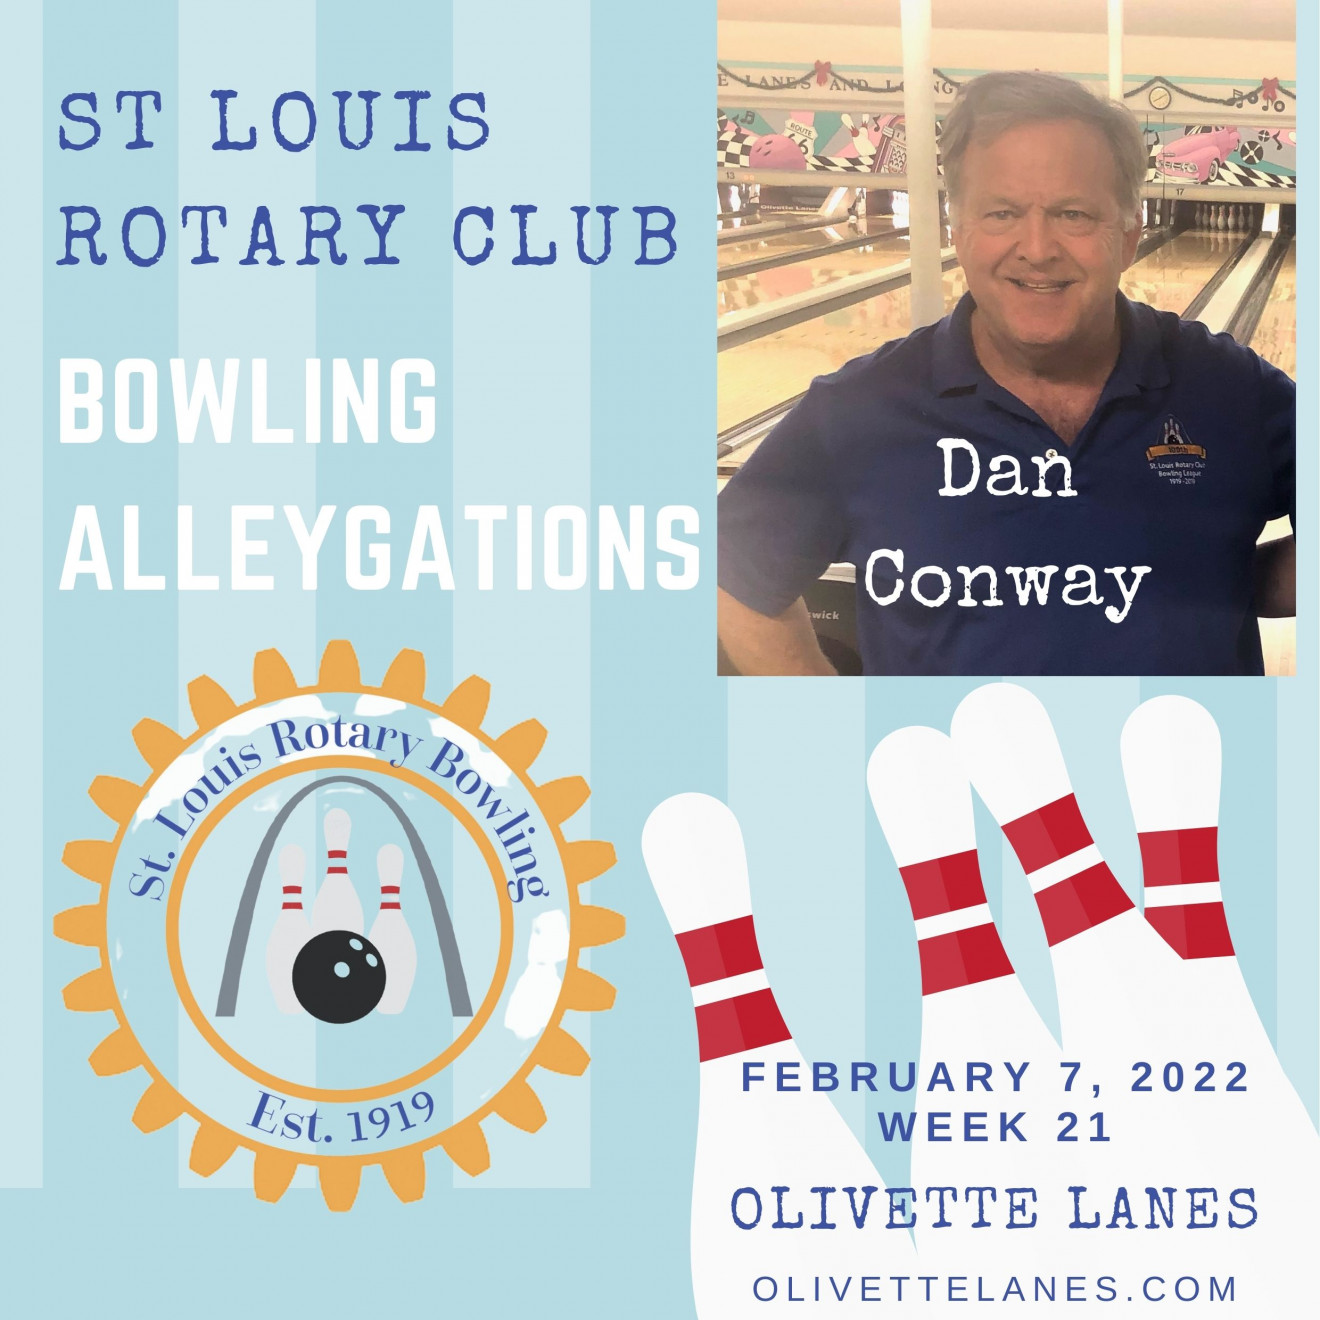 Dan Conway's Bowling Alleygations Week 21 2-7-22